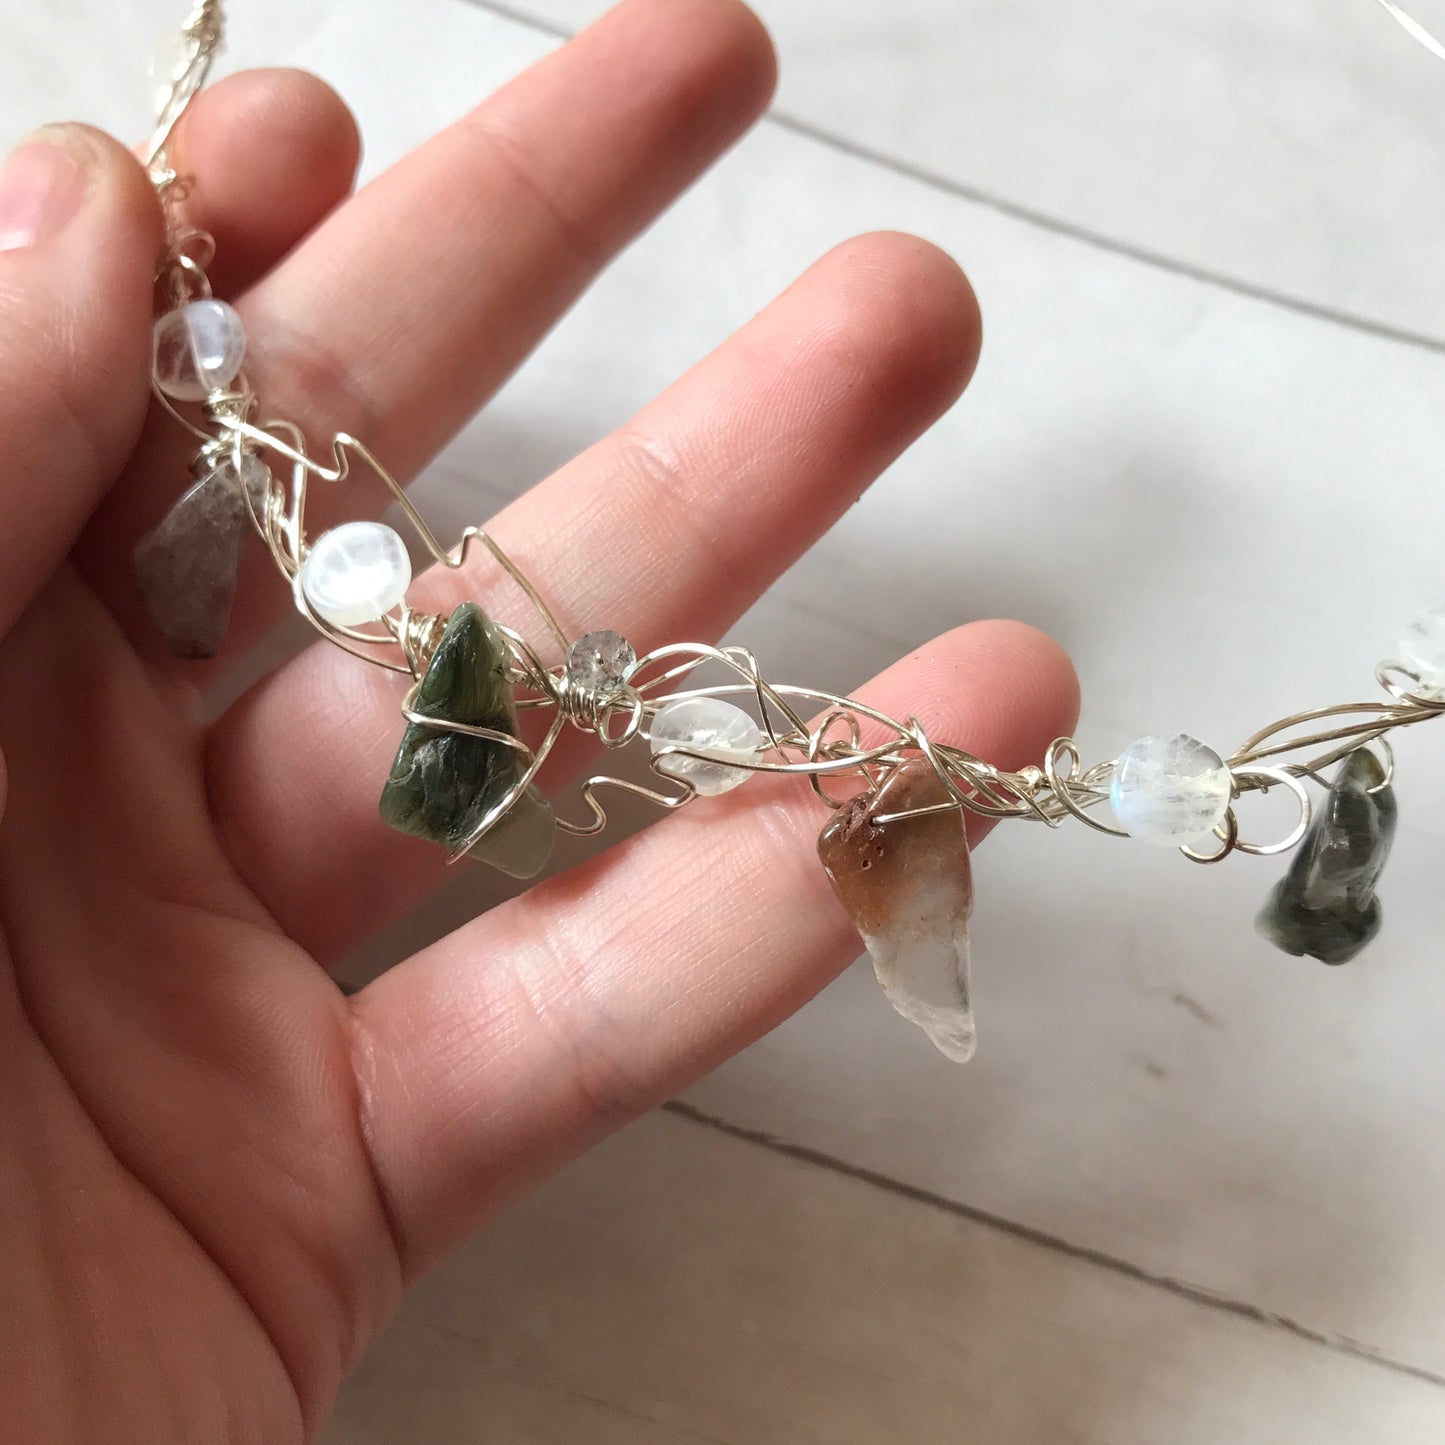 Personal Collection: quartz necklace with rutile/tourmaline inclusions